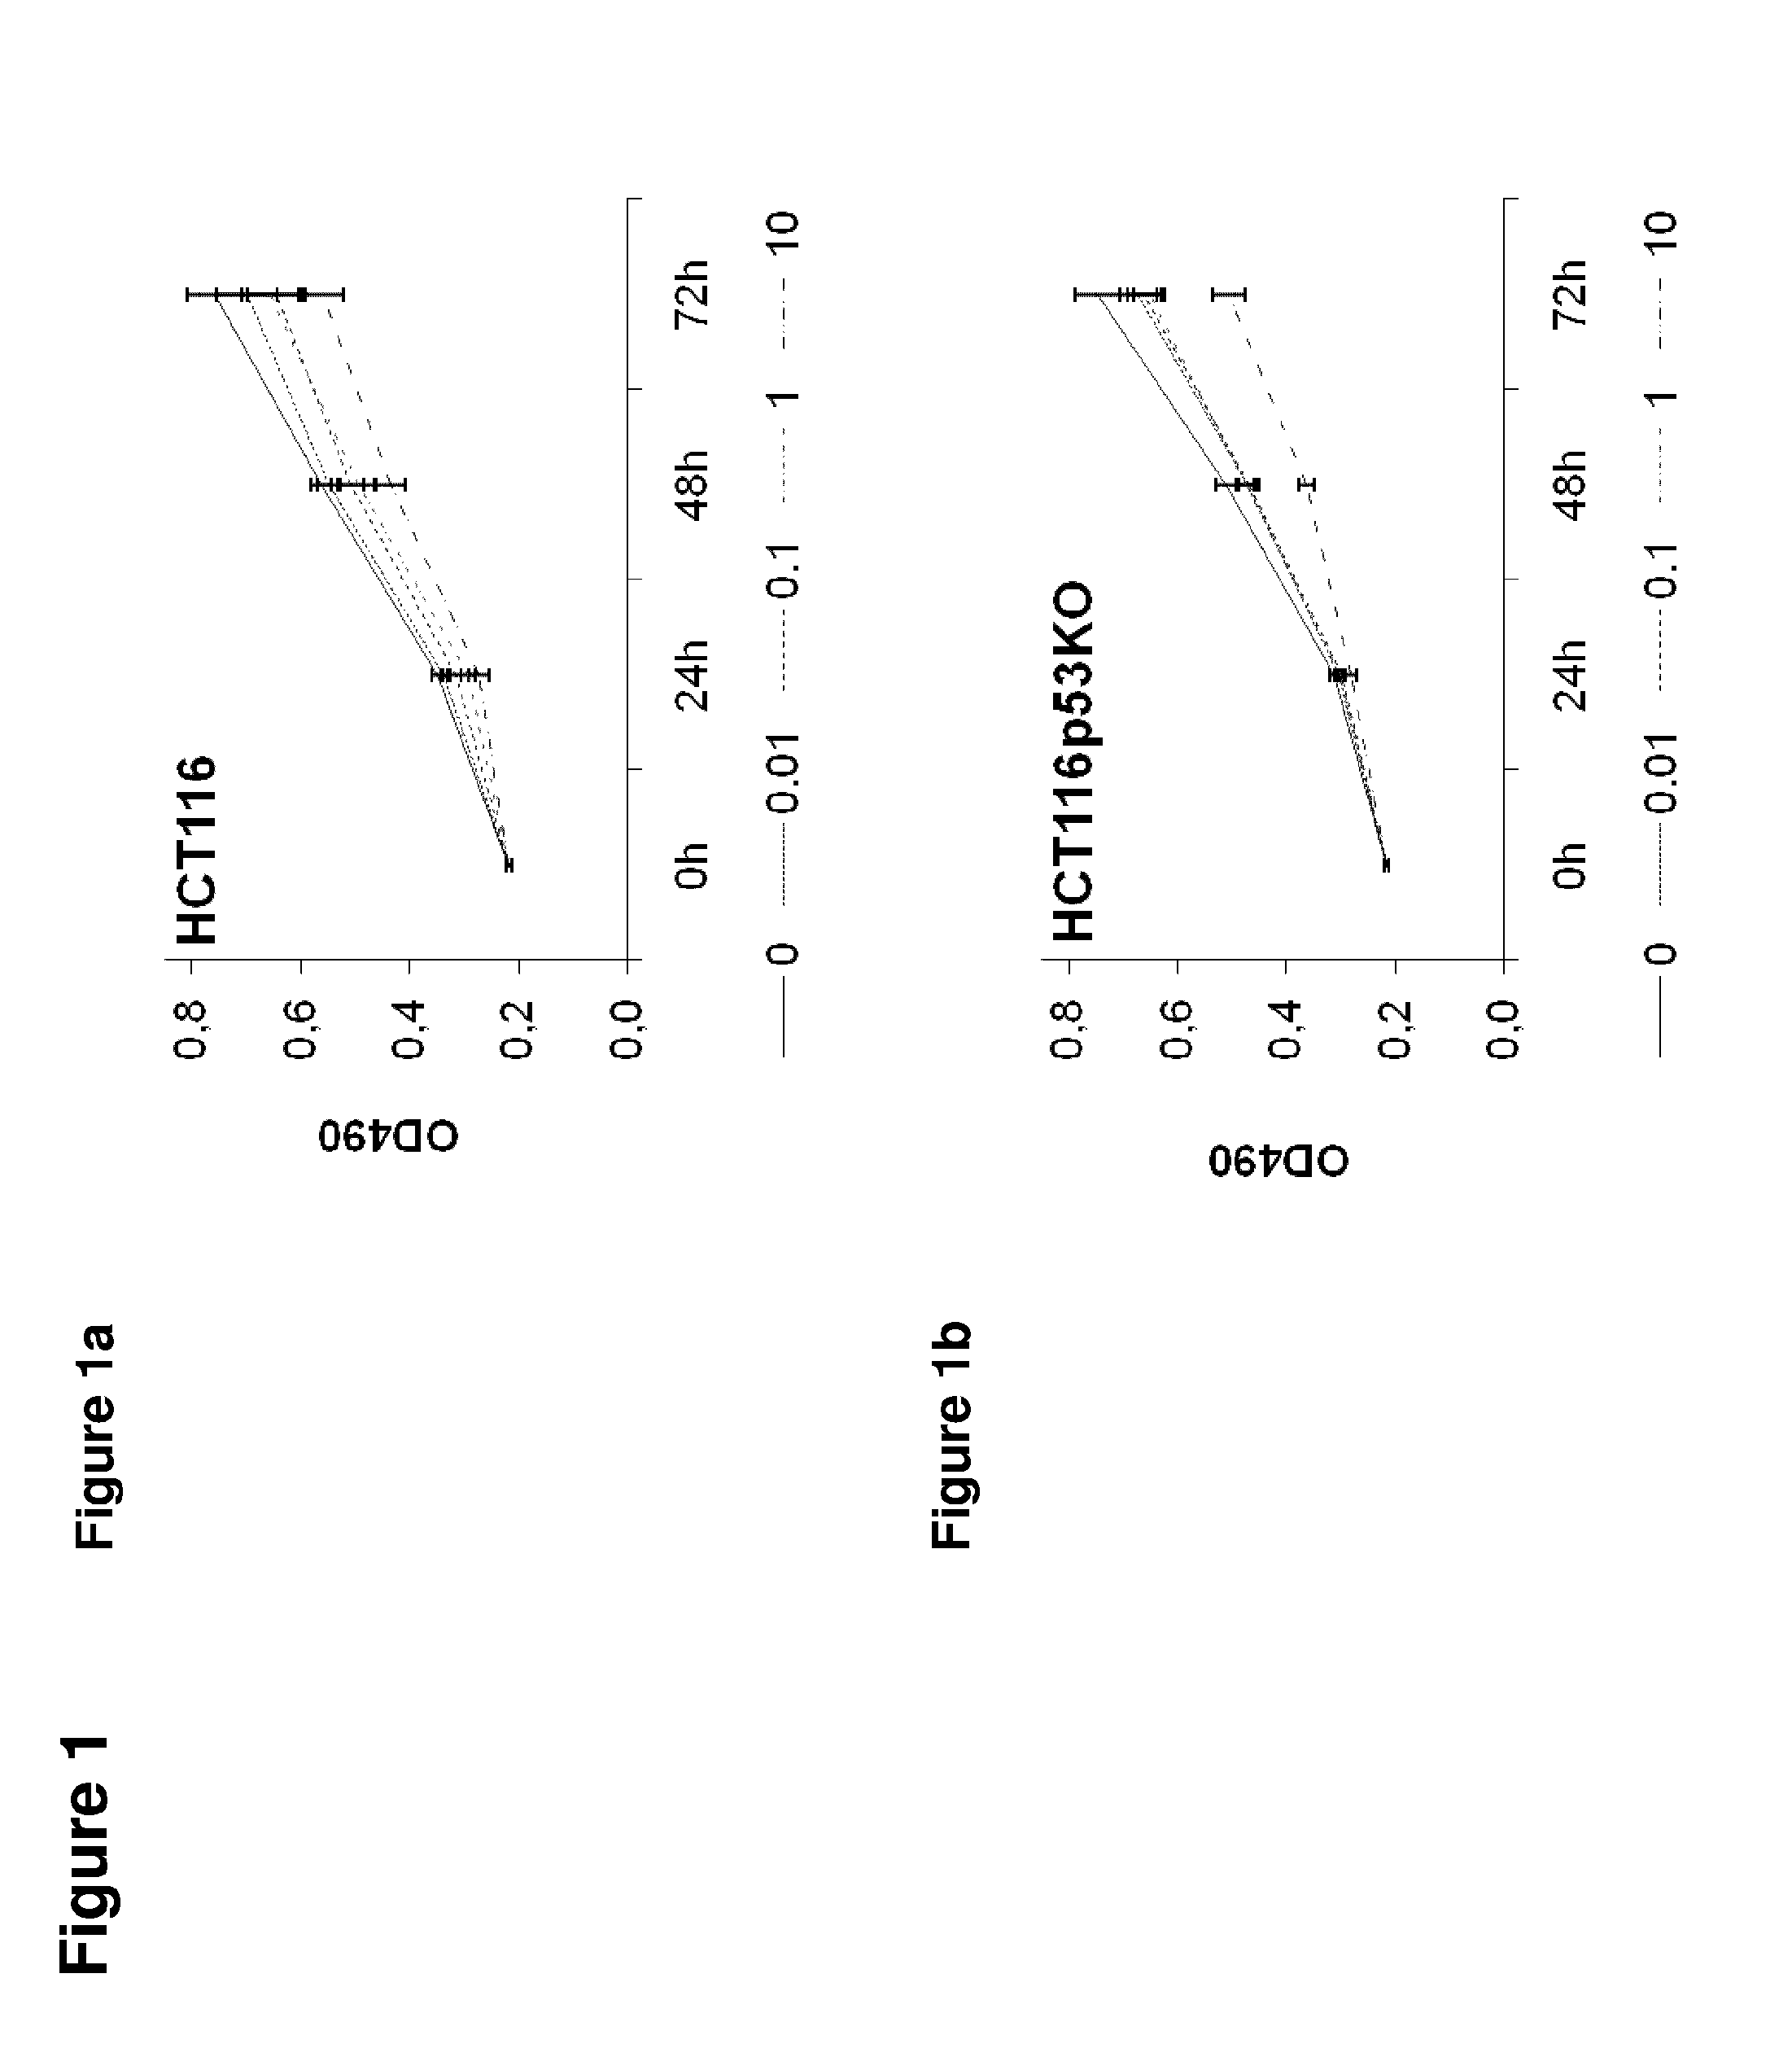 Combinations of a btk inhibitor and fluorouracil for treating cancers